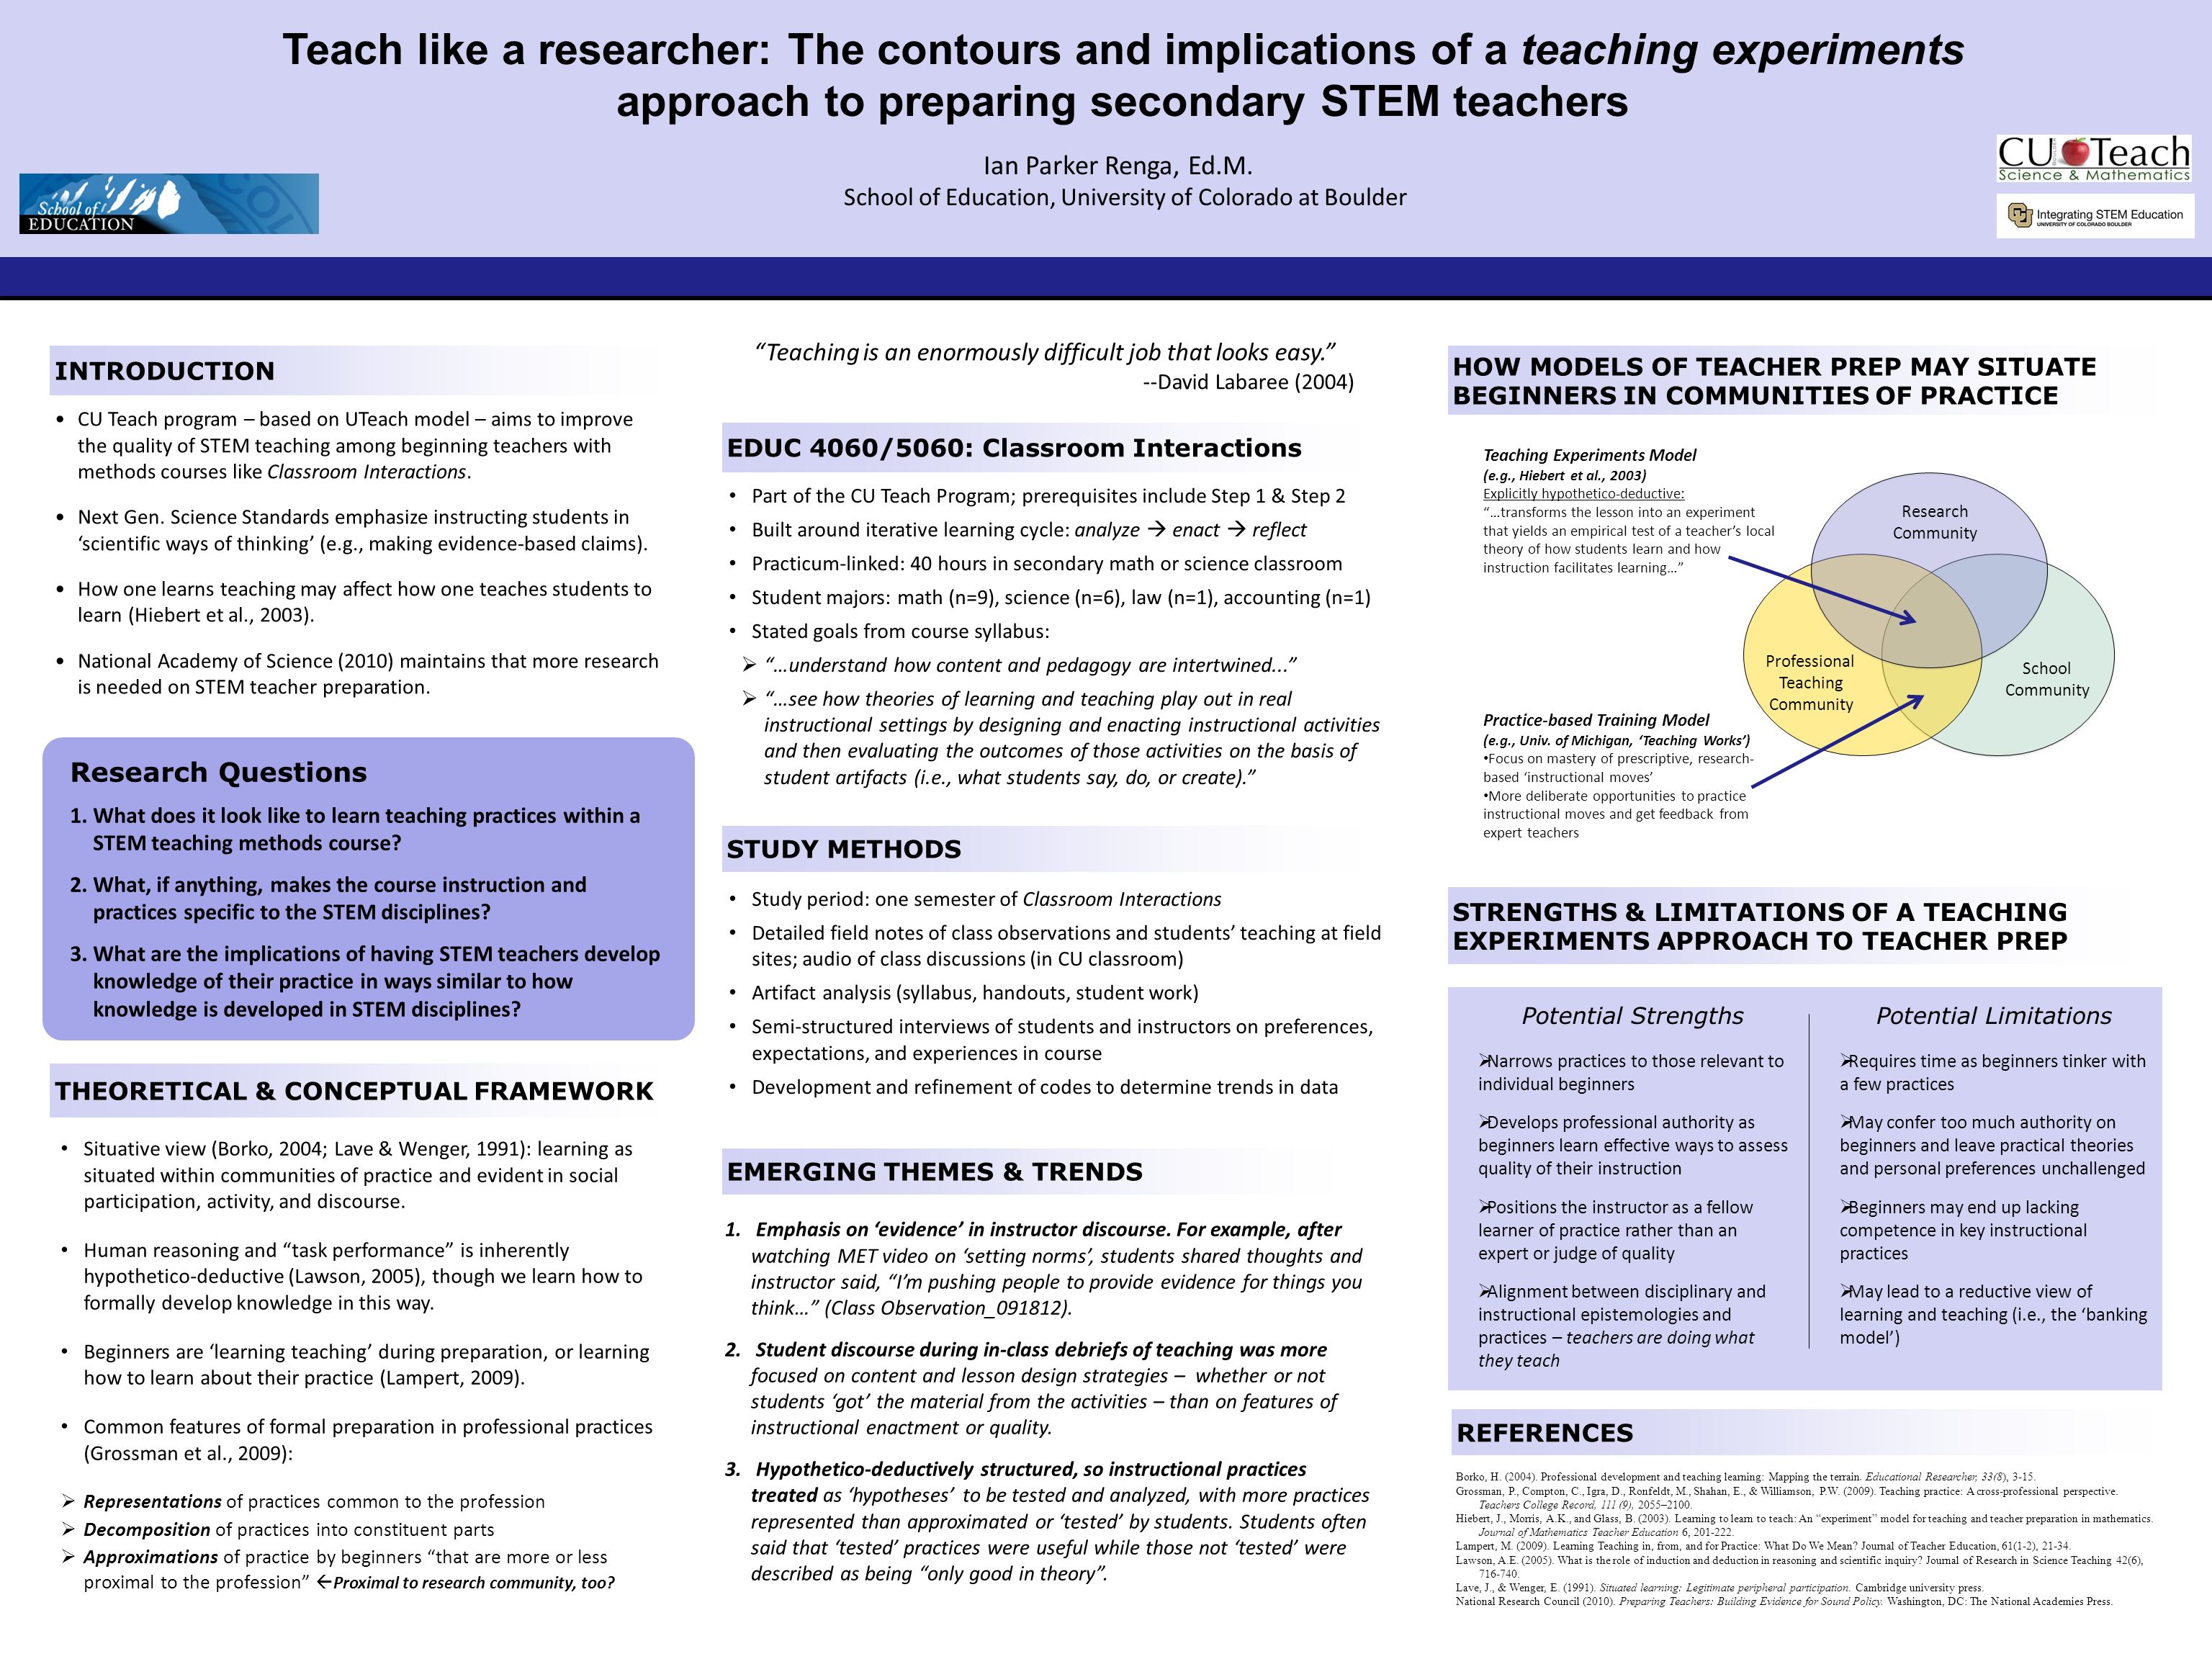 Teach like a researcher: The contours and implications of a teaching experiments approach to preparing secondary STEM teachers Ian Parker Renga, Ed.M.